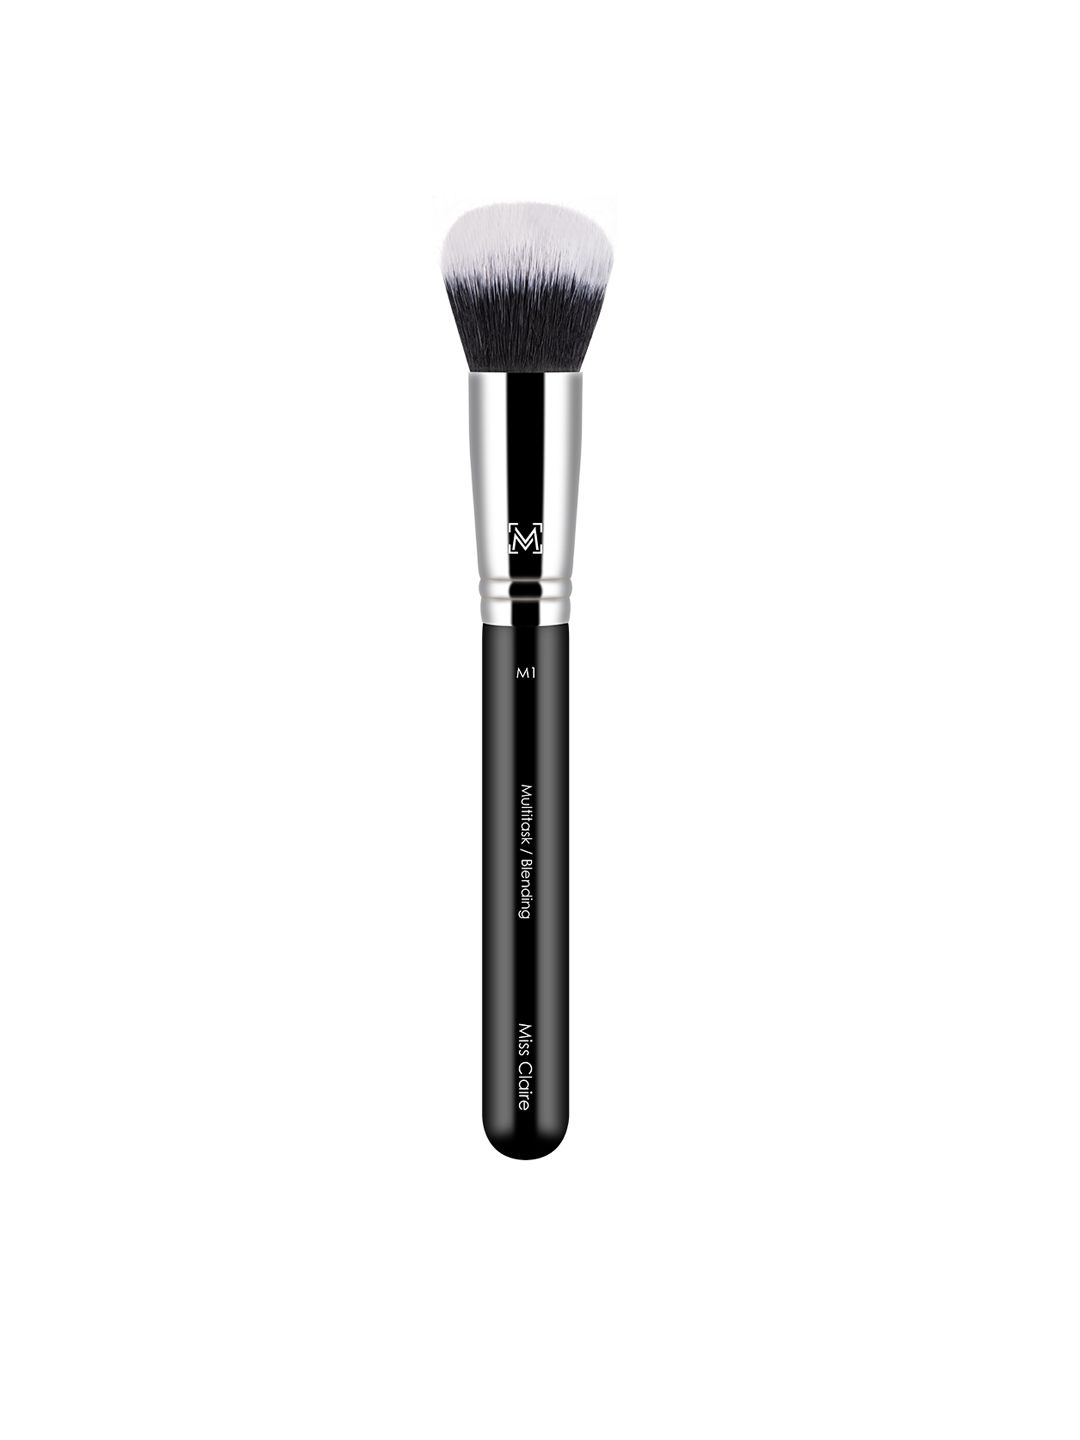 Miss Claire M1 - Multitask/Blending Brush - Silver-Toned & Black Price in India